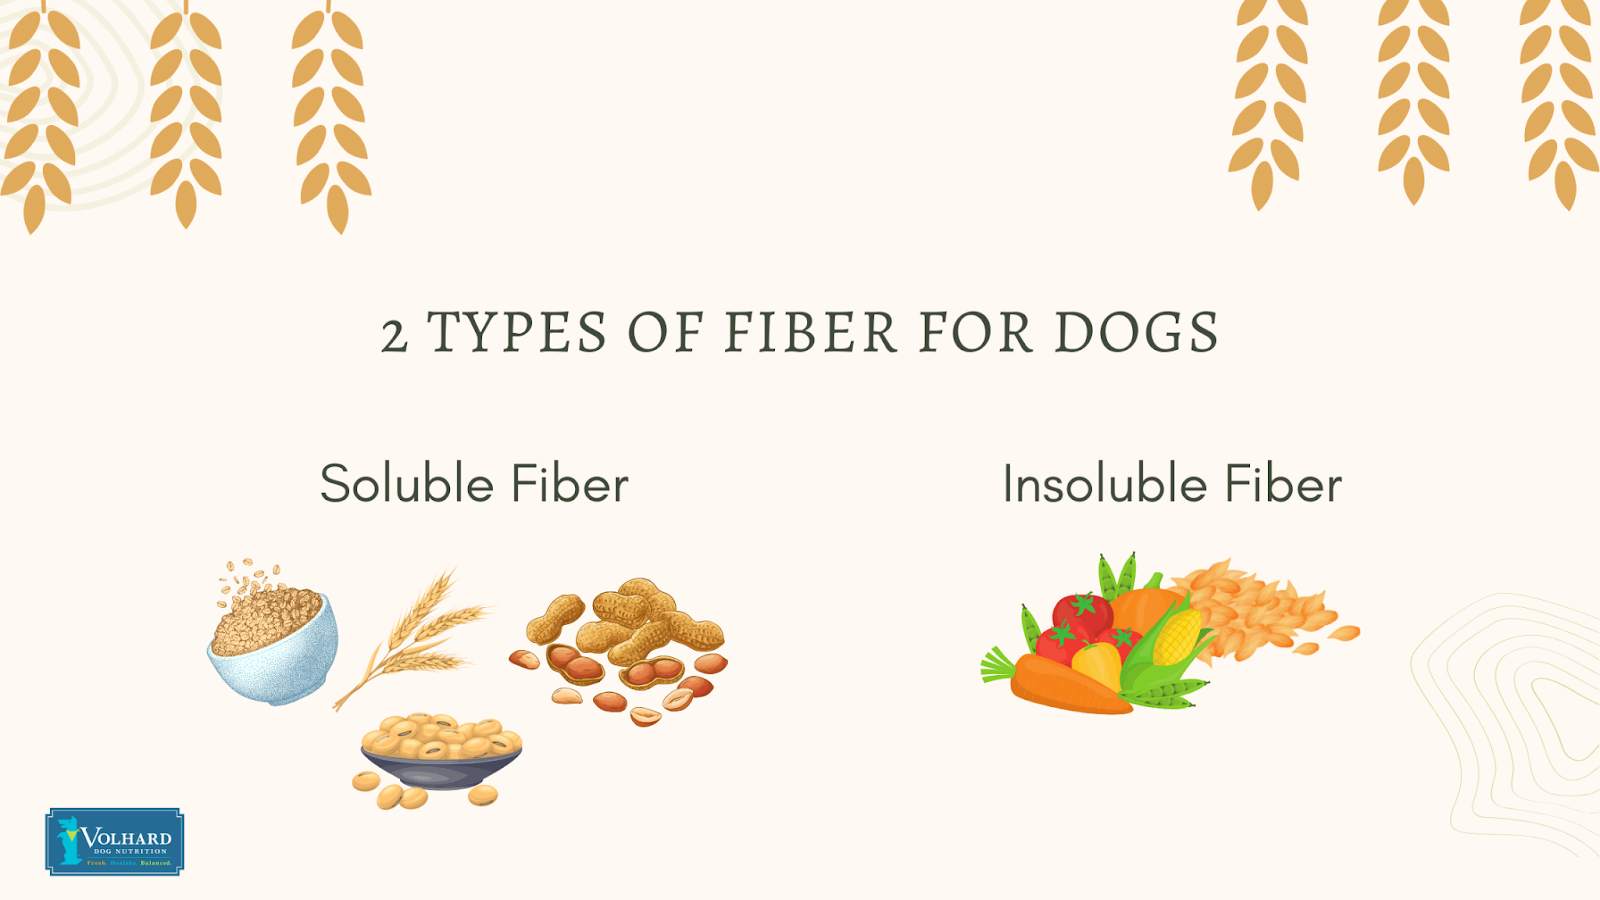 2 types of fiber for dogs